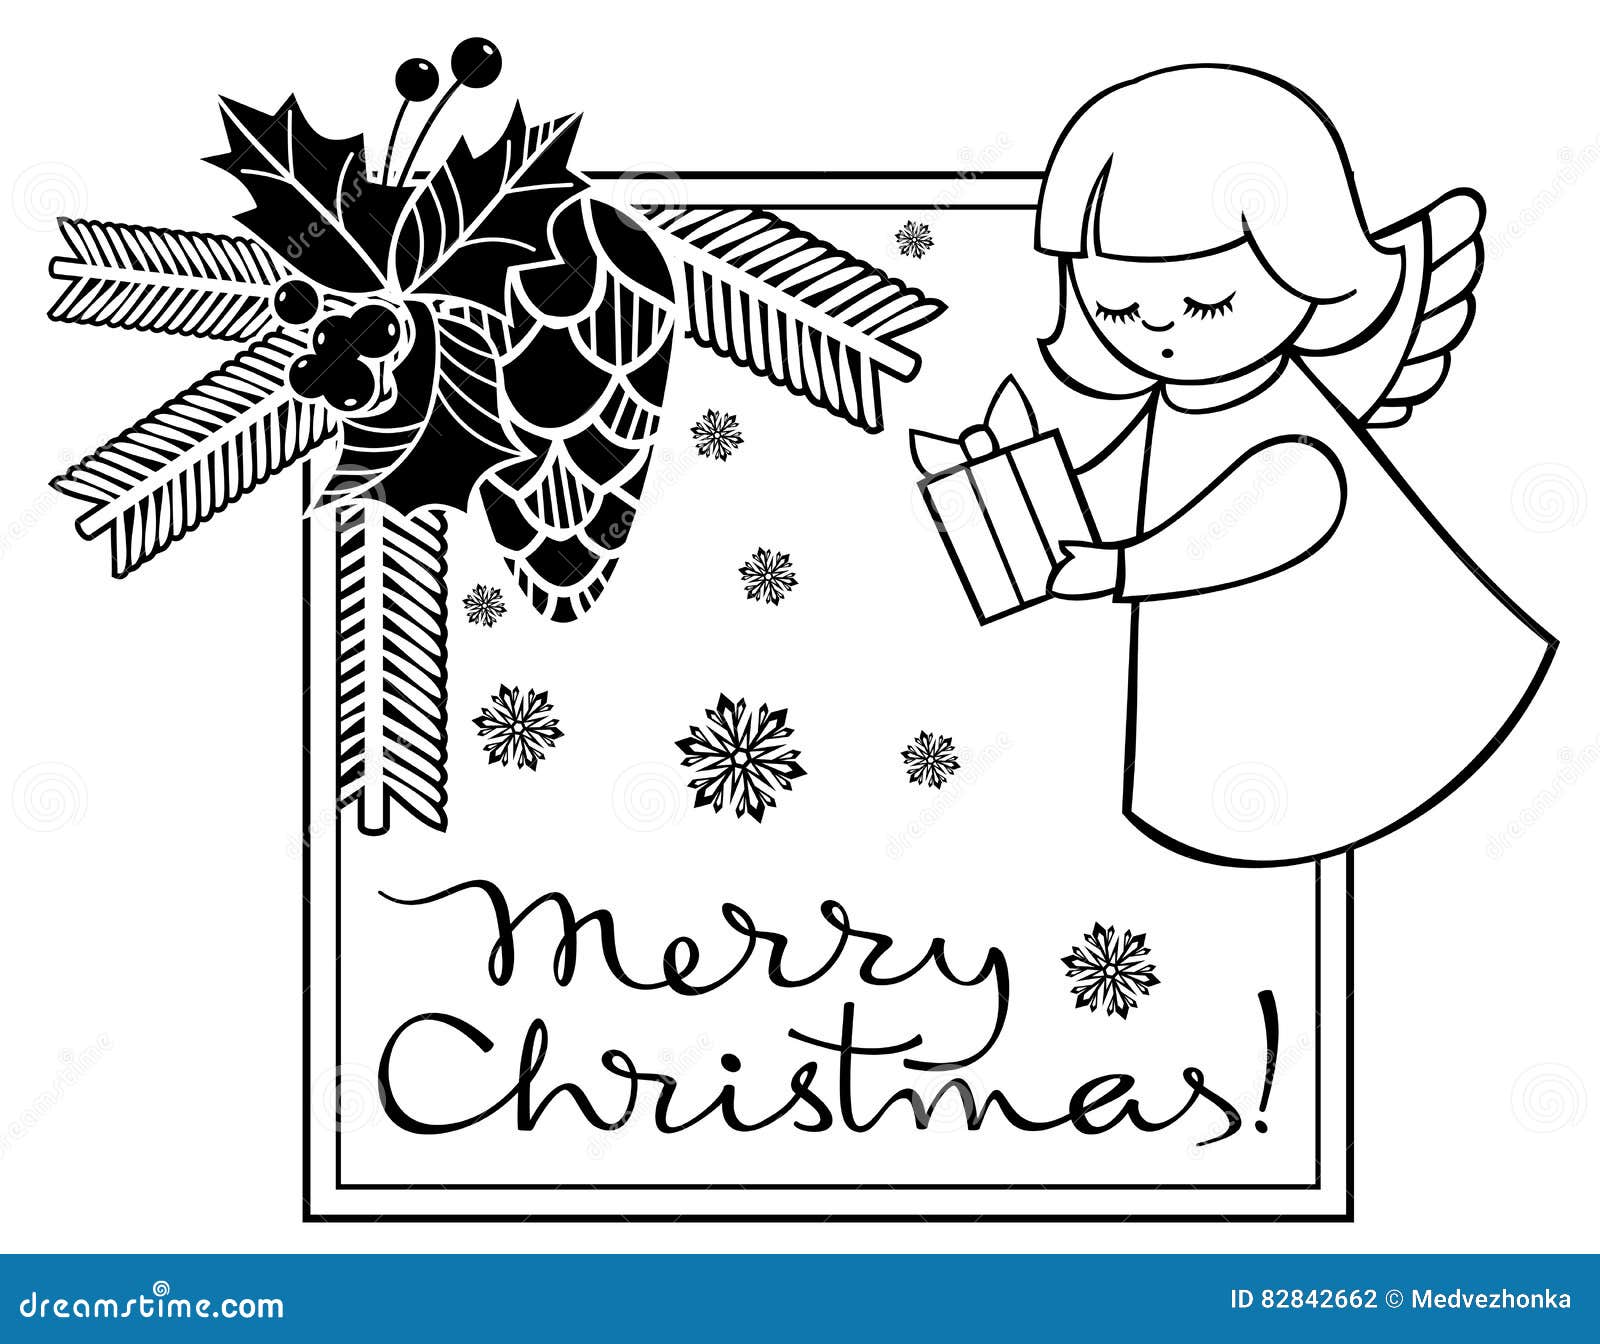 Black And White Christmas Frame With Cute Angel. Stock Illustration - Illustration of cartton ...